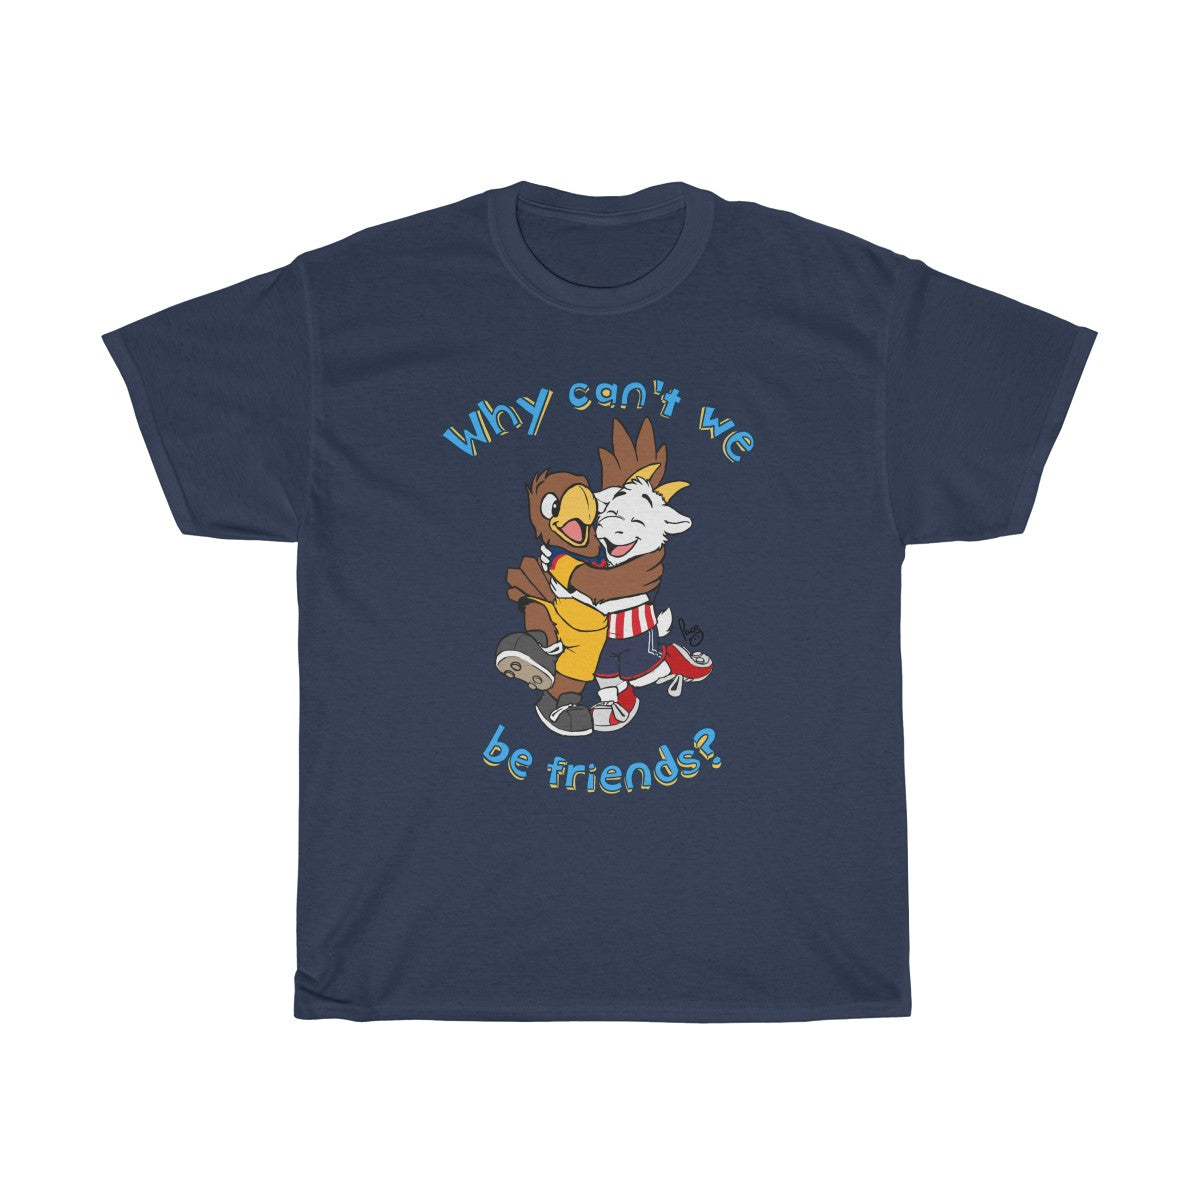 Why Can't we be Friends? - T-Shirt T-Shirt Paco Panda Navy Blue S 